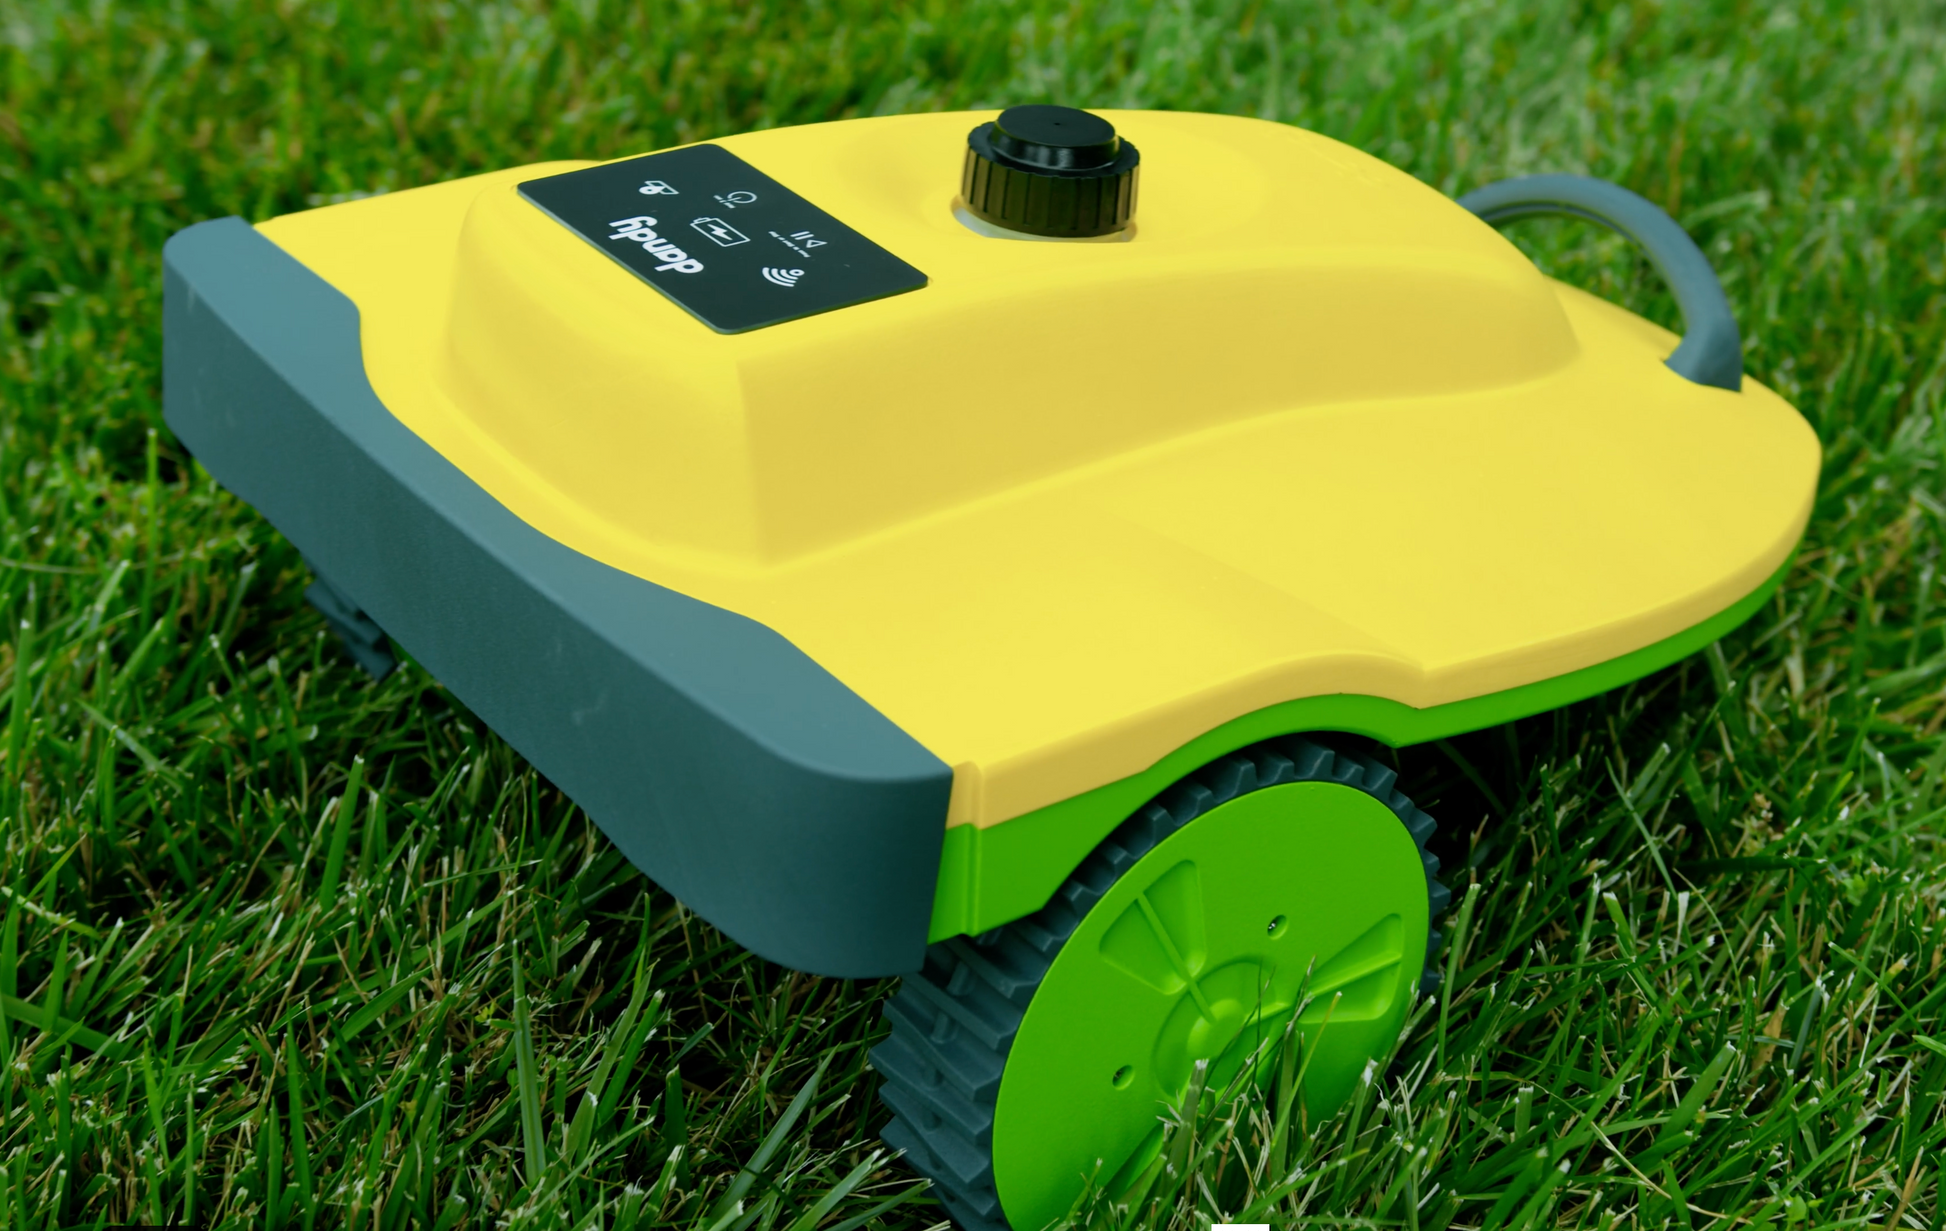 Image of Dandy DT-01 robot on grass